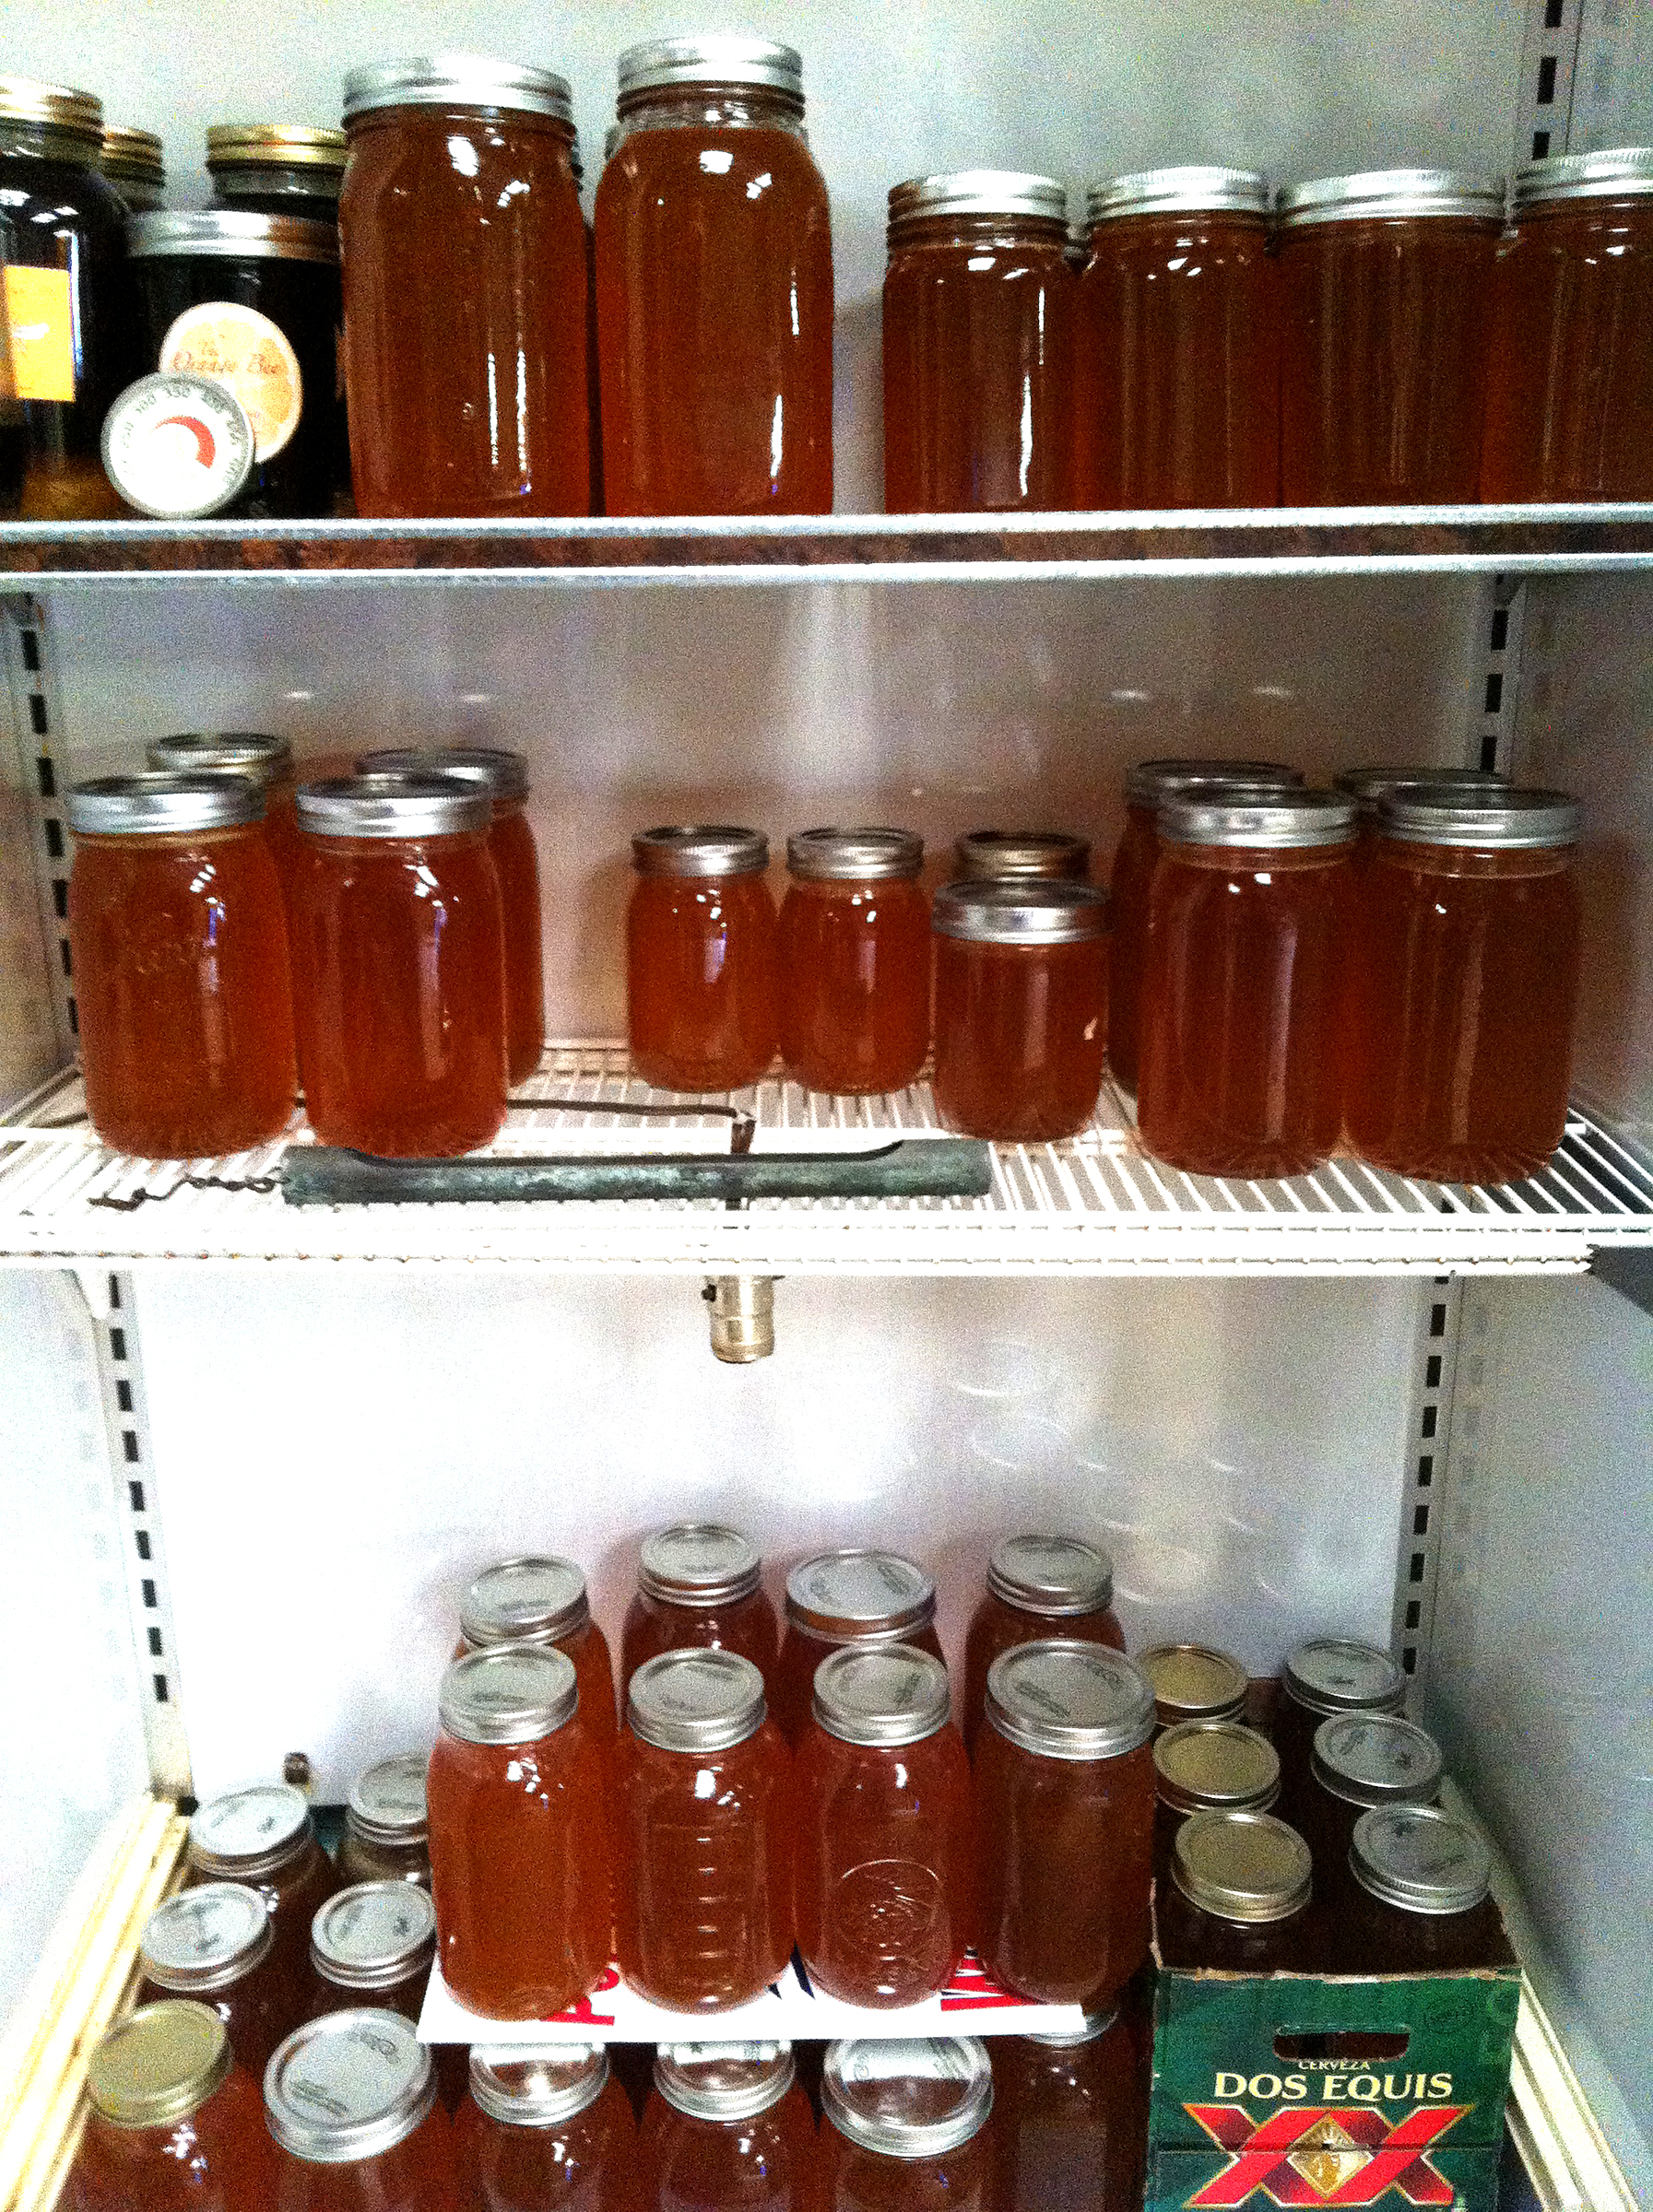 18.5 gallons bottled in quart and pint jars.  